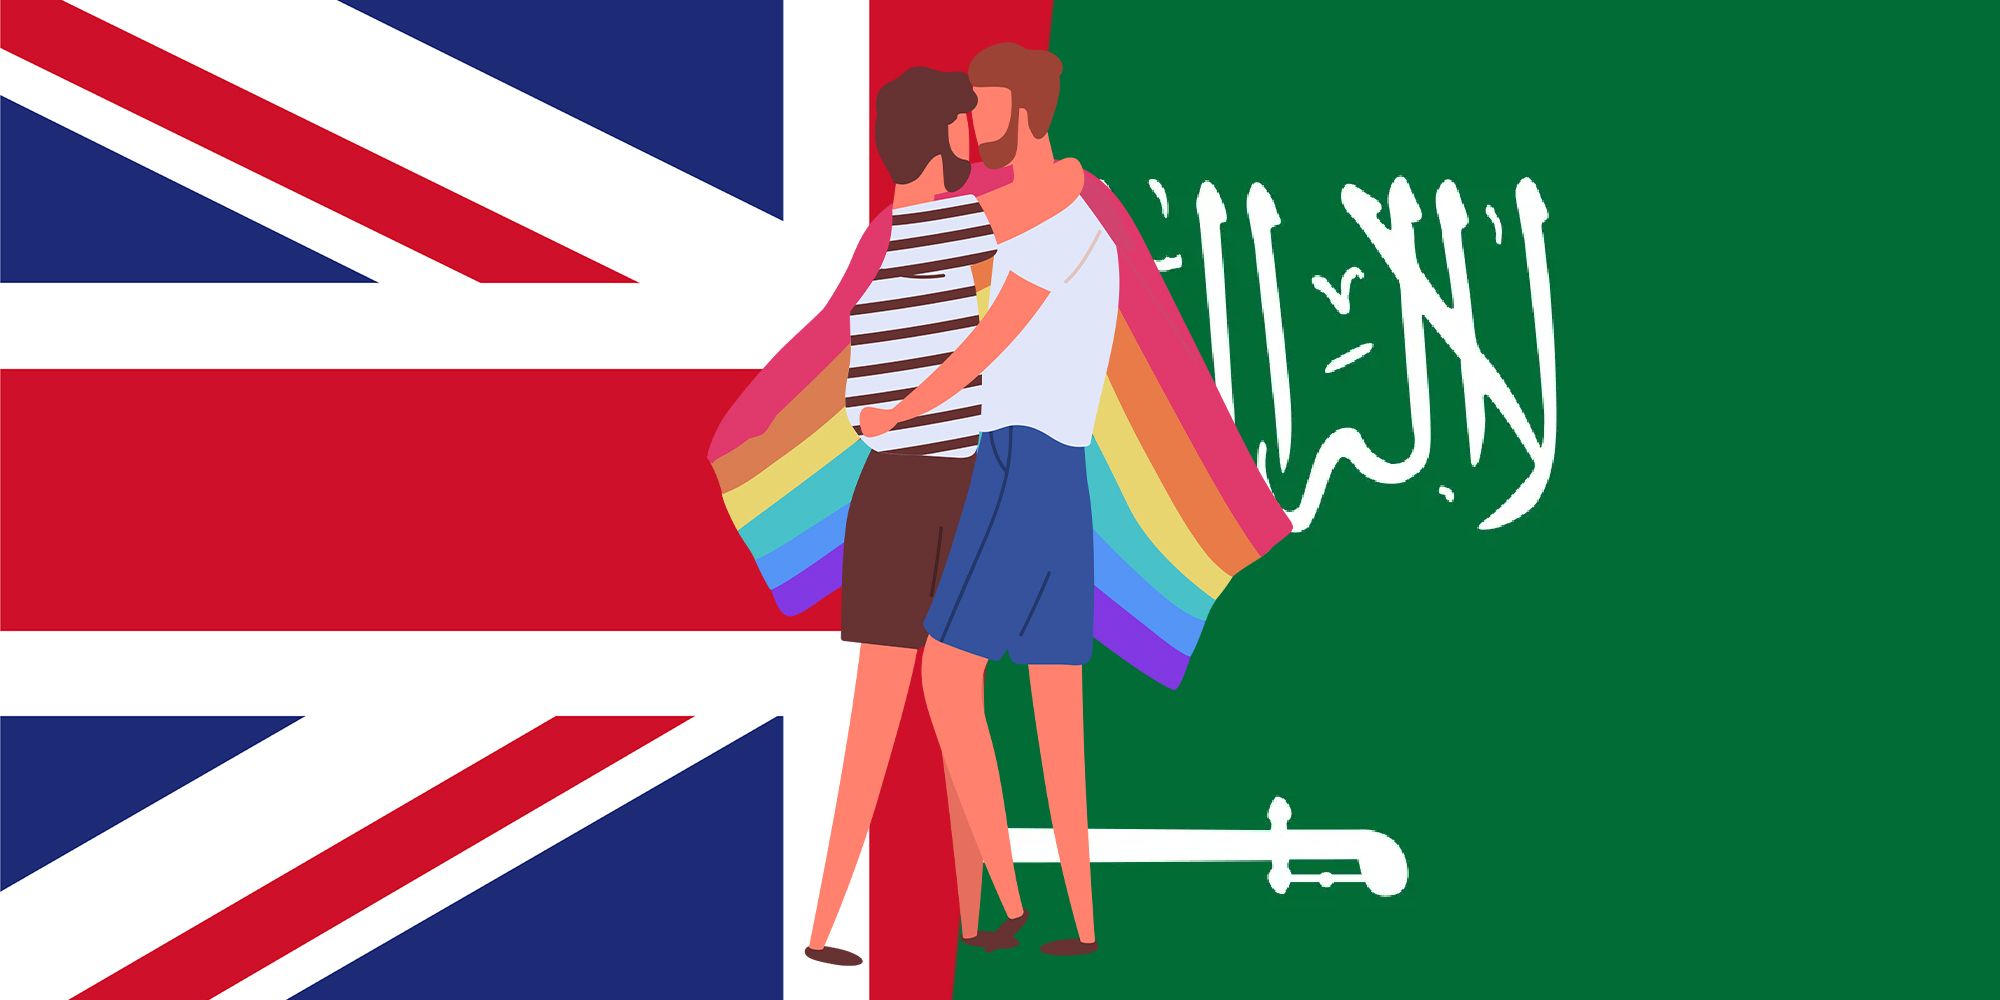 Funny How British eSports Is Partnering With Saudi eSports After Making A Pride Post In June